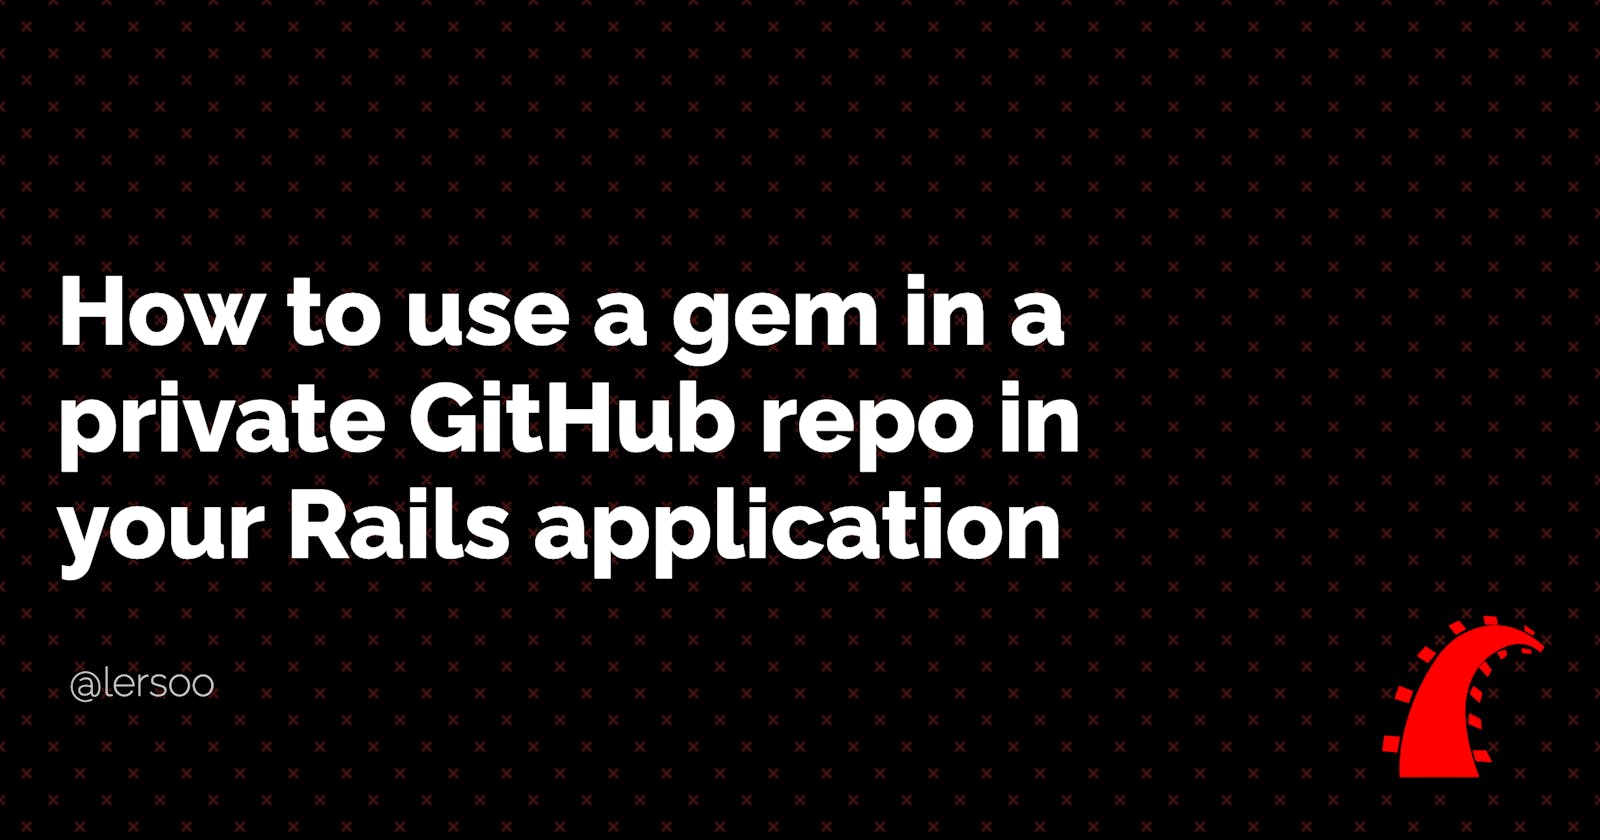 How to use a gem in a private GitHub repo in your Rails application